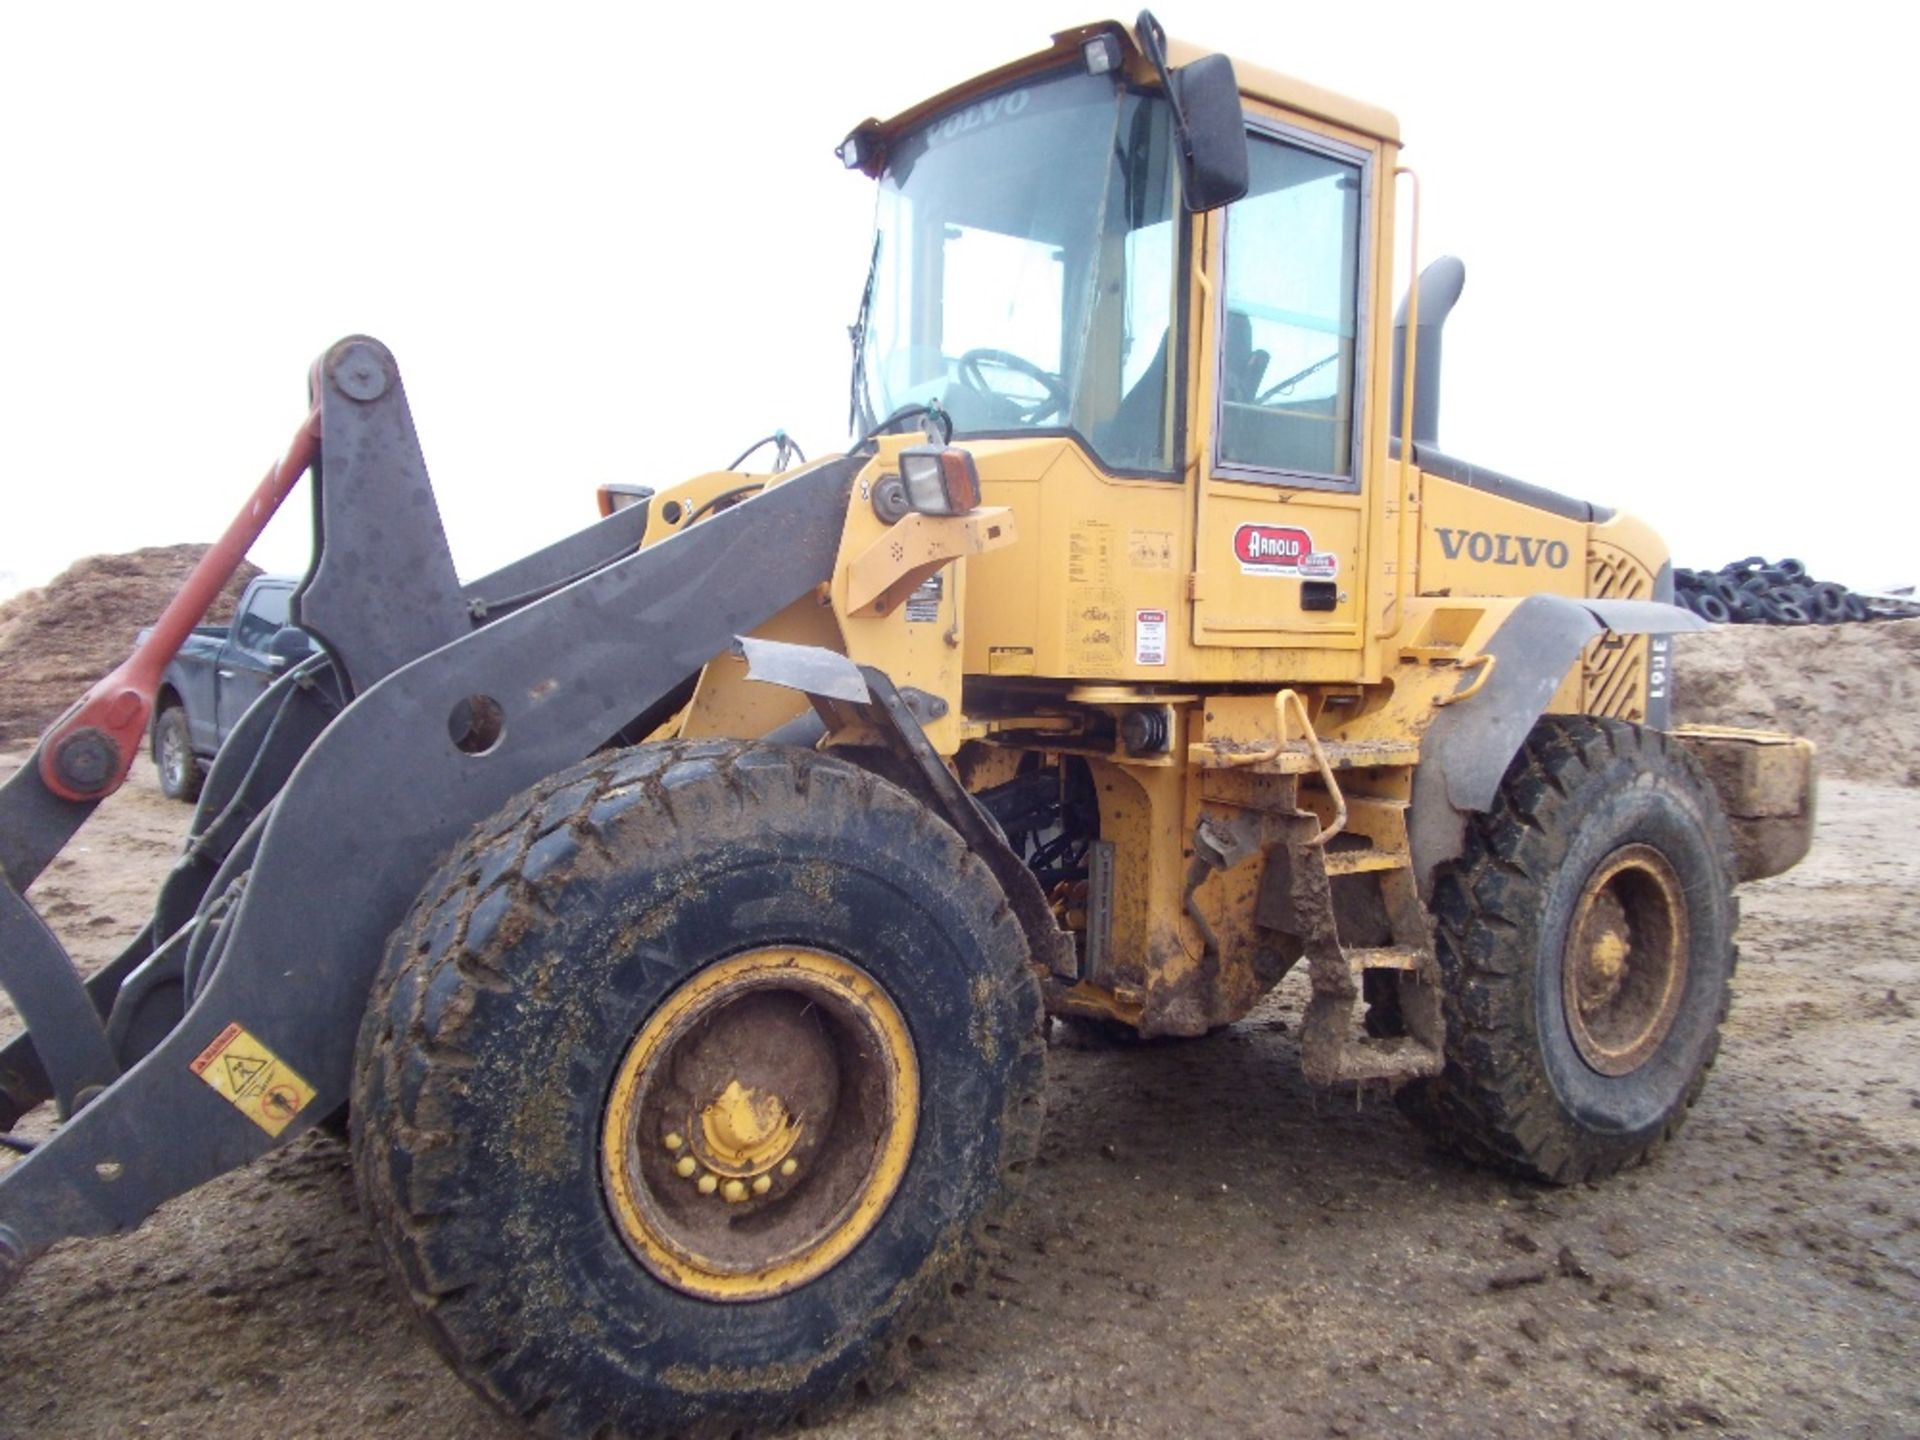 Volvo L90E 4spd power shift trans hi lift hyd quick connect new rubber 12K hrs. (we will reserve - Image 2 of 7